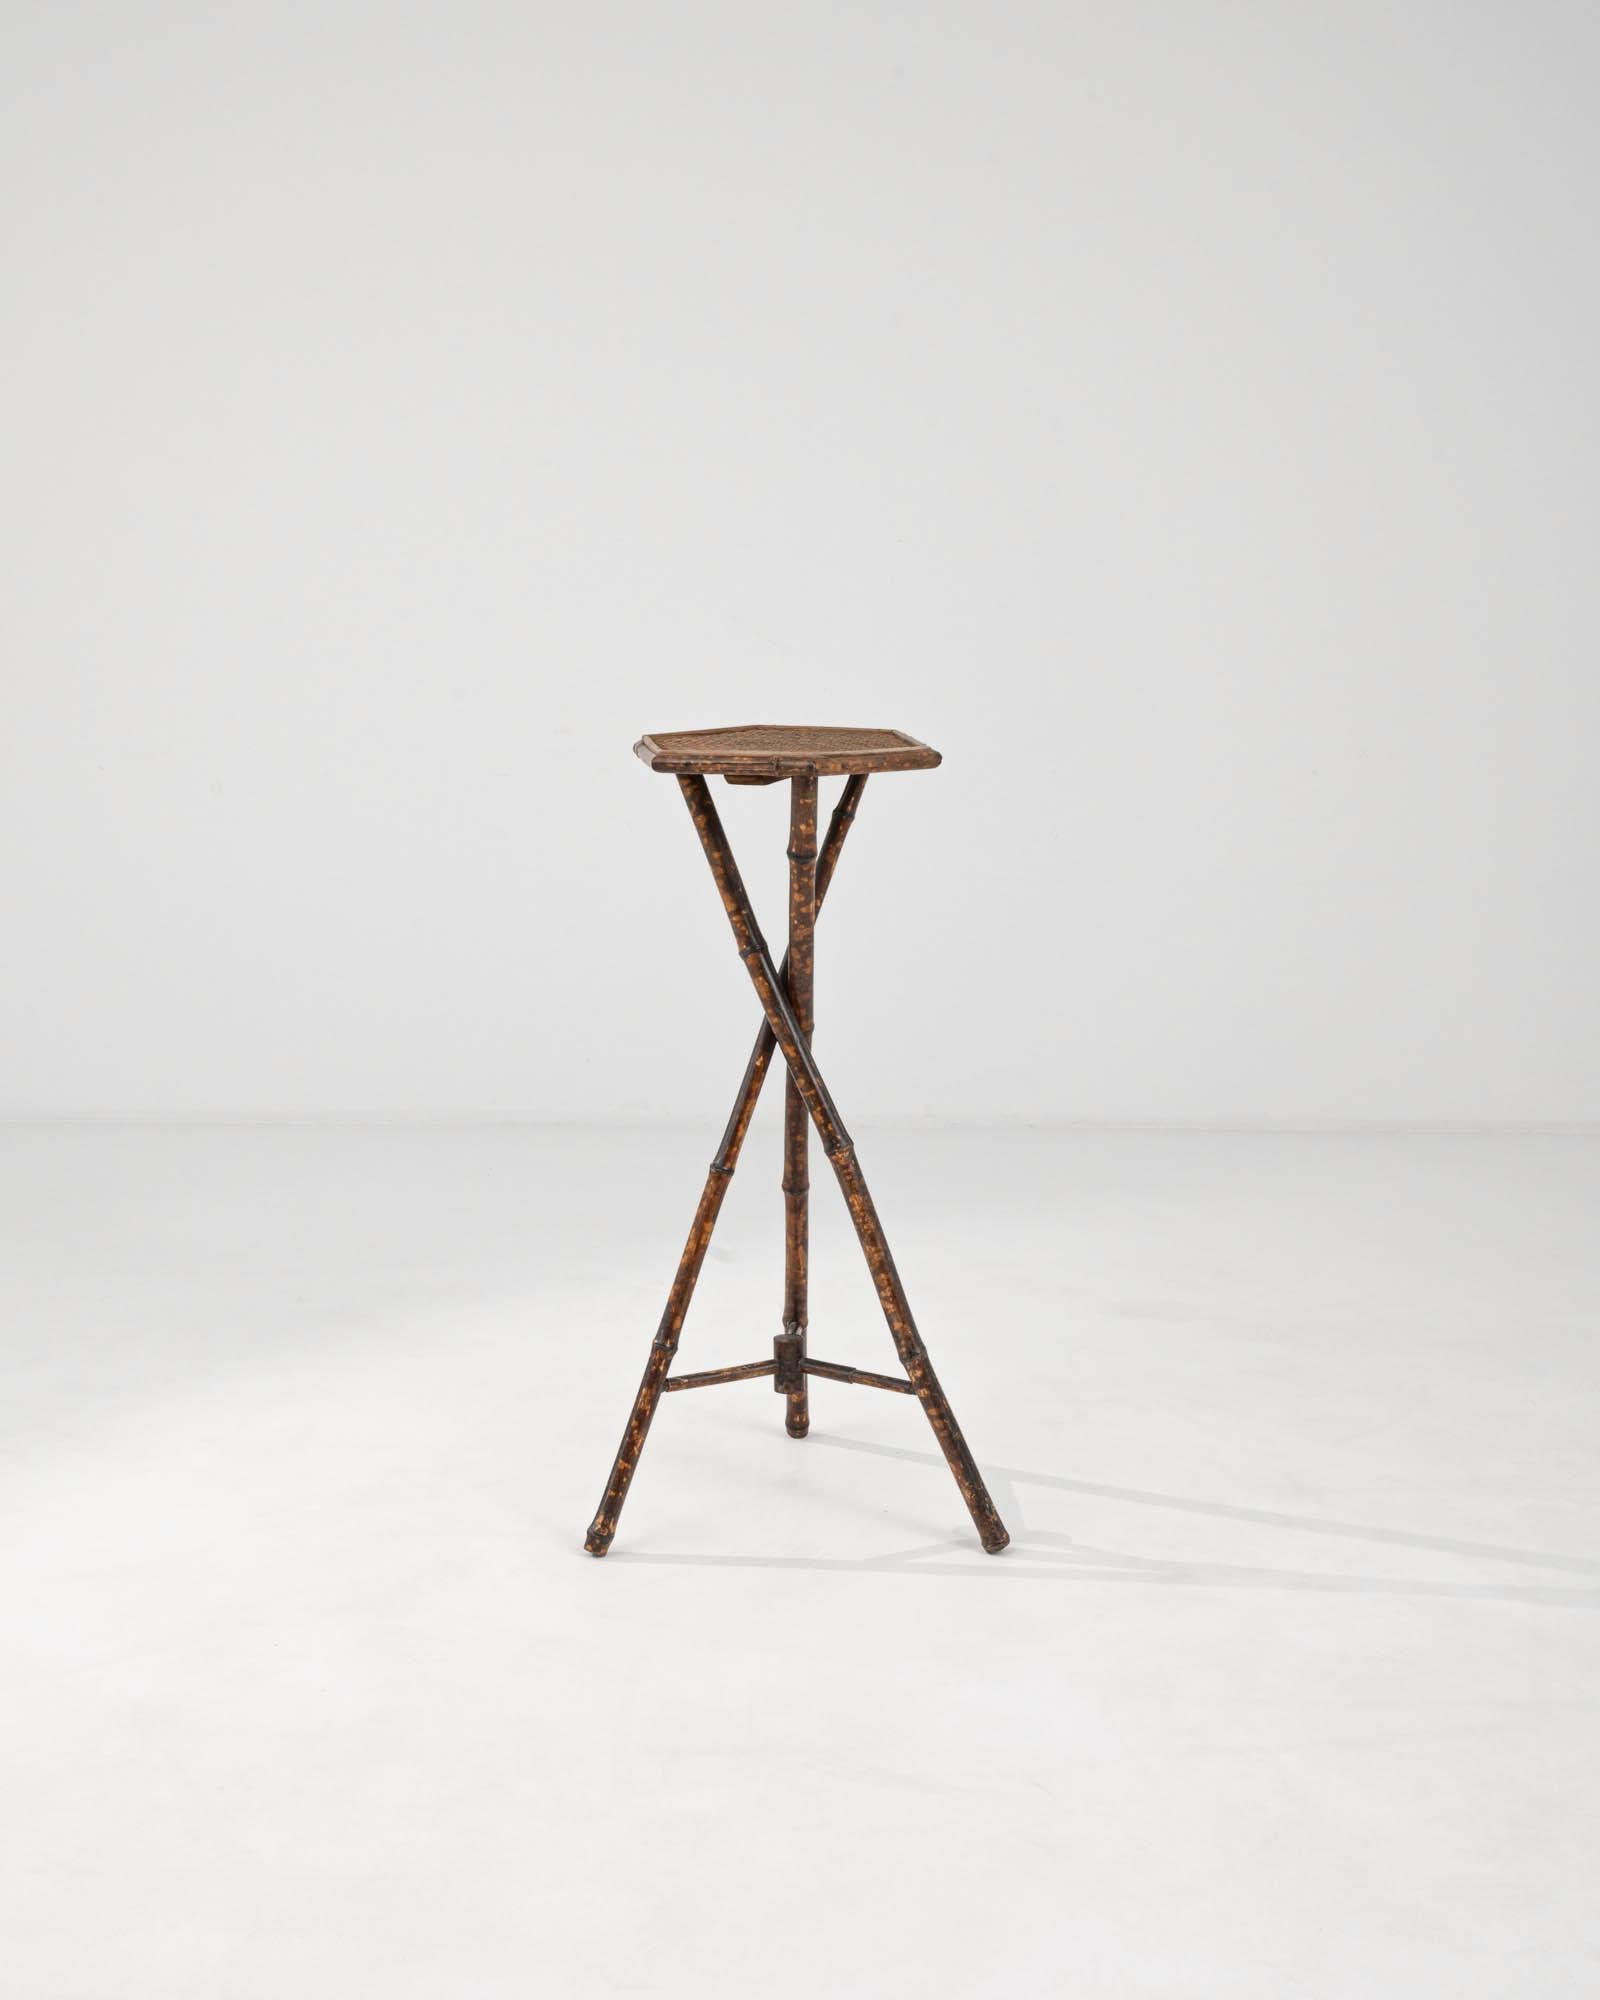 This 1900s French Bamboo Pedestal embodies the elegance and simplicity of classic design. The natural bamboo construction offers a lightweight yet robust frame, highlighted by the charming wear that reveals its century-old story. Its cross-braced